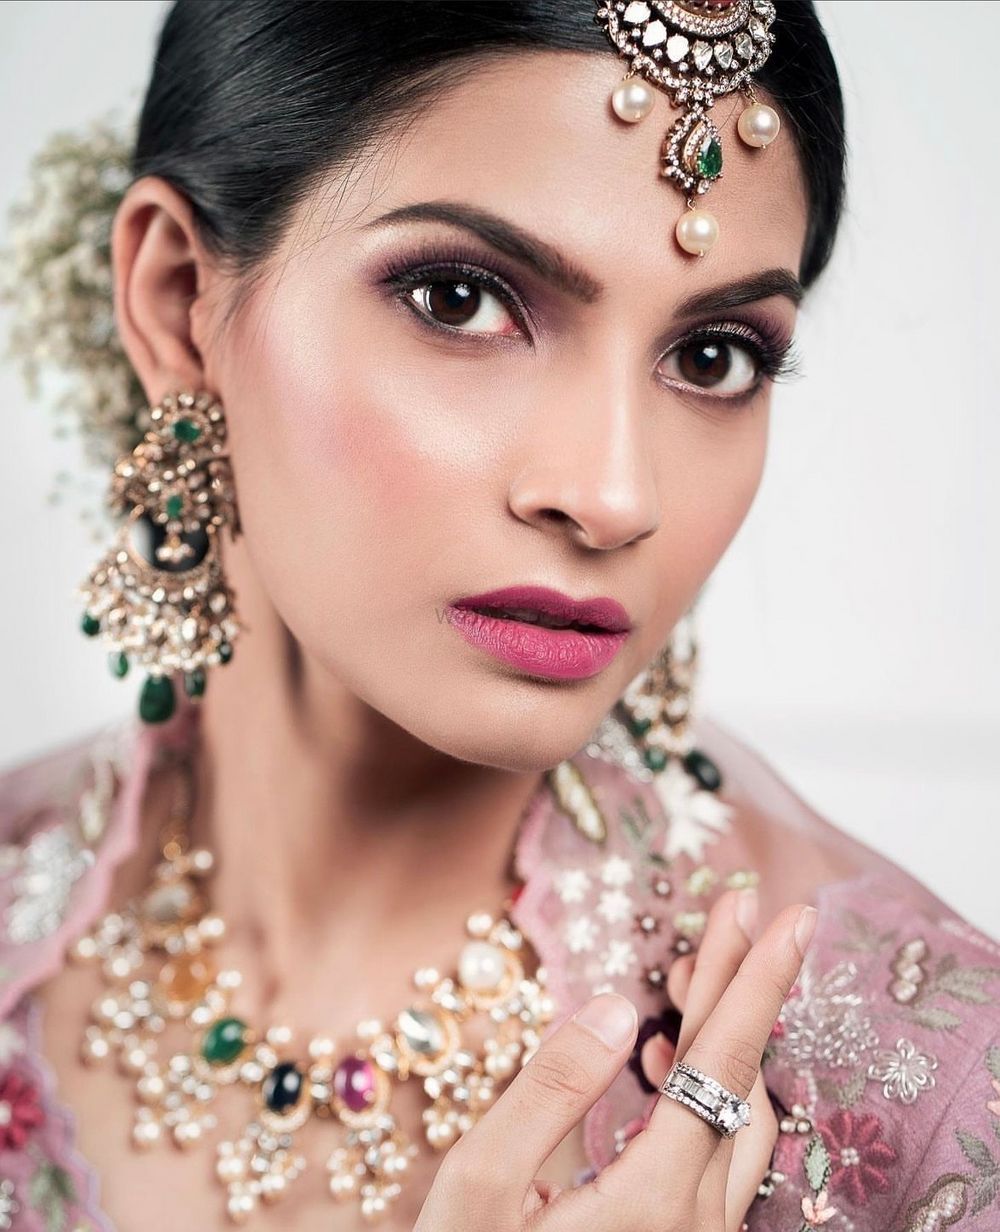 Photo From Bridal Diaries - By Makeup Artist Megha